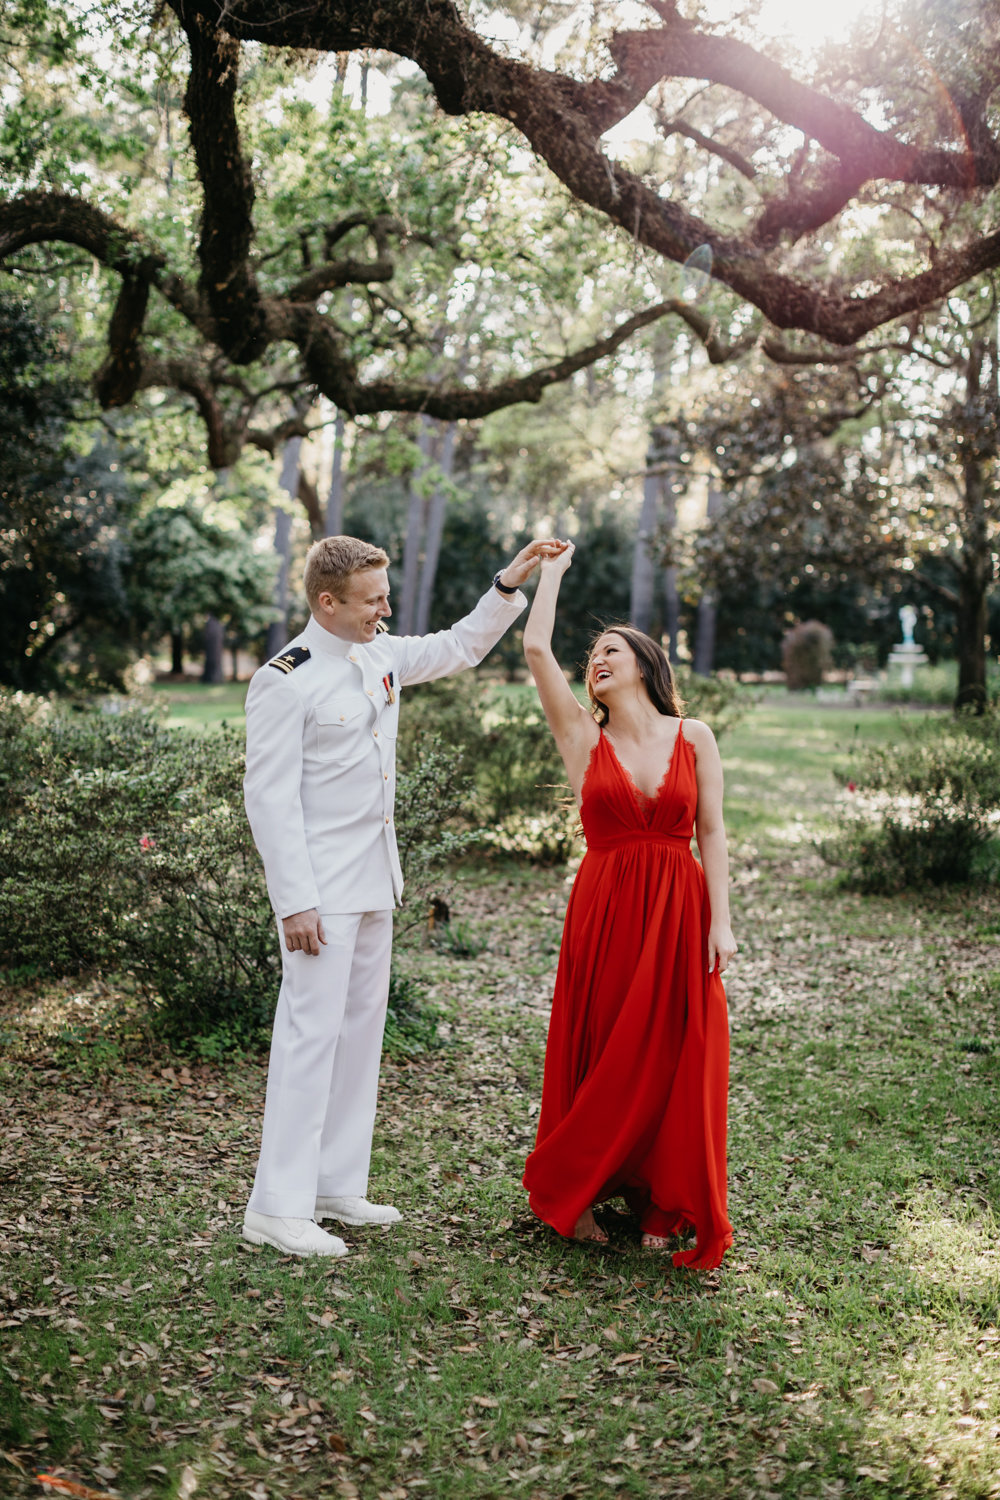 Ash-Simmons-Photography-Eden-Gardens-Couples-Session-2737